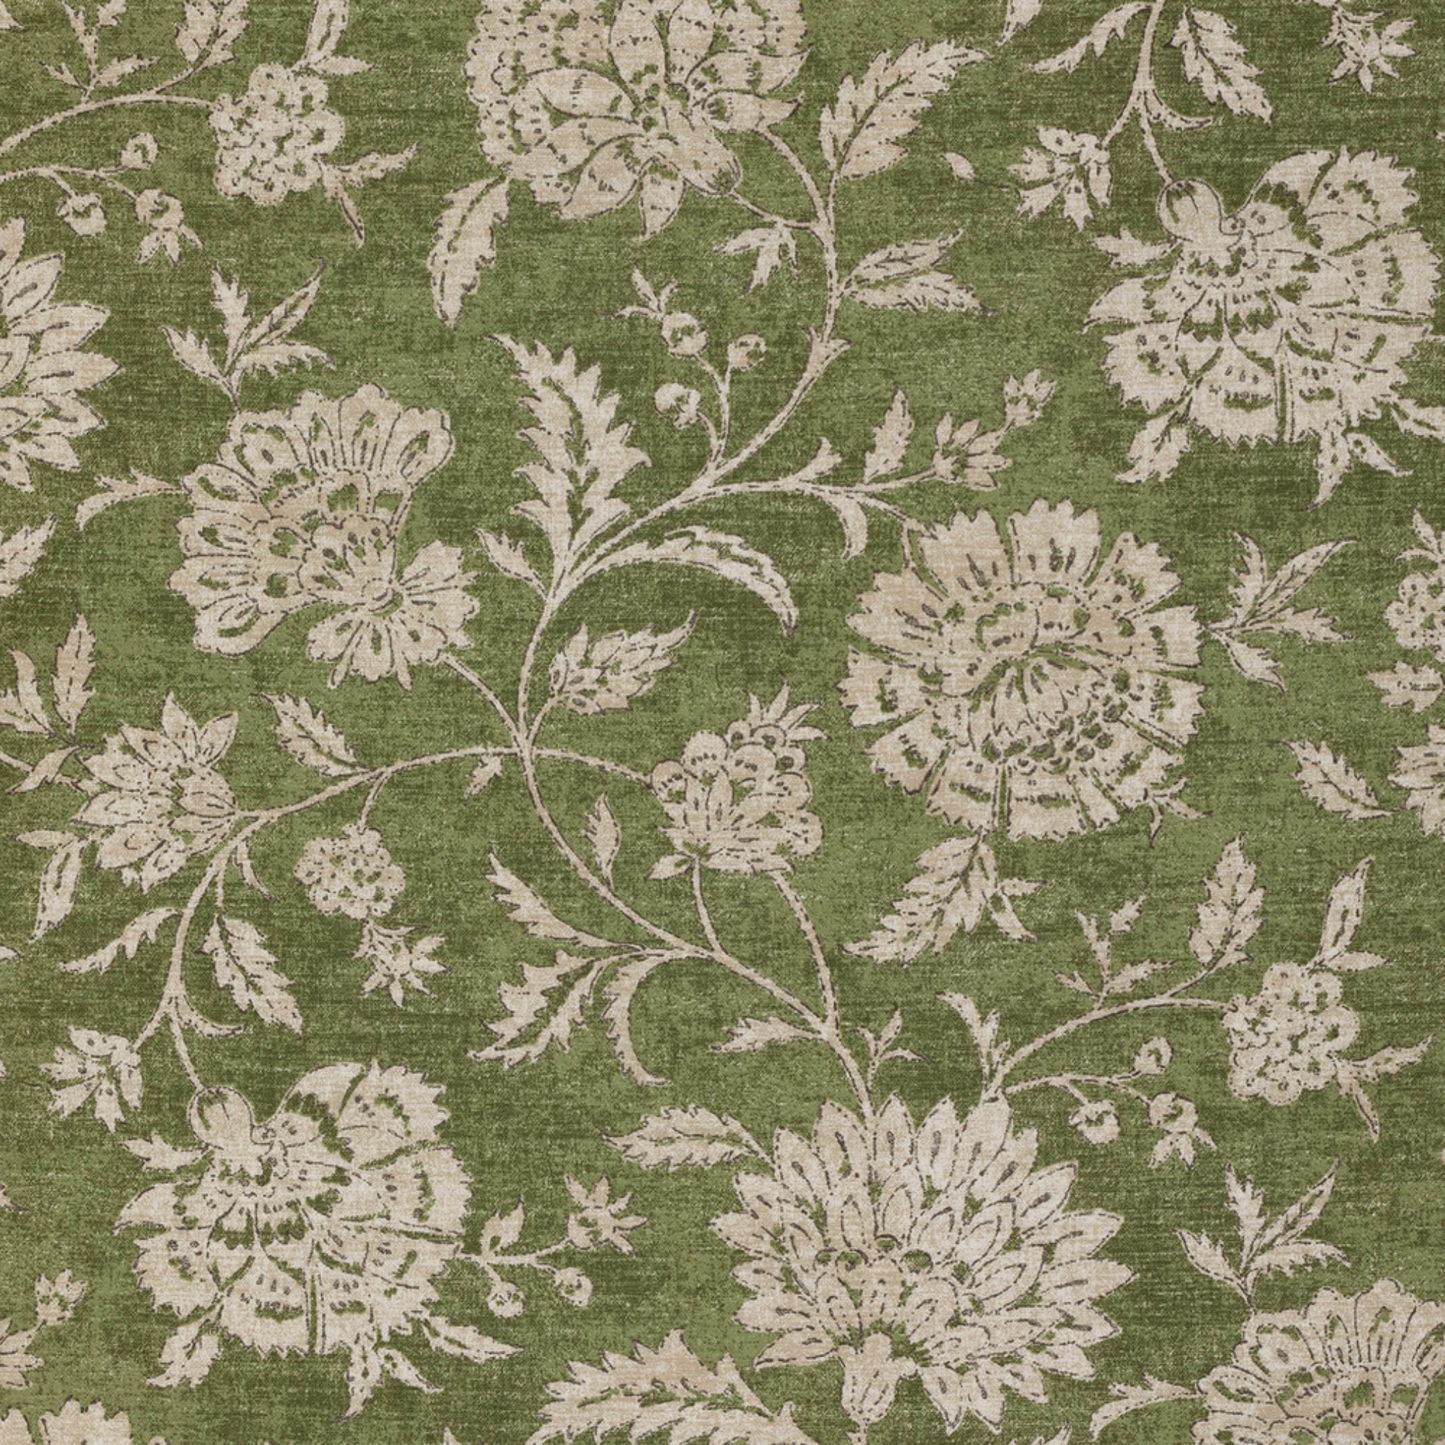 Olive Green Floral & Foliage Pillow Cover - Available in Lumbar, Bolster, Throw, Euro Sham Sizes